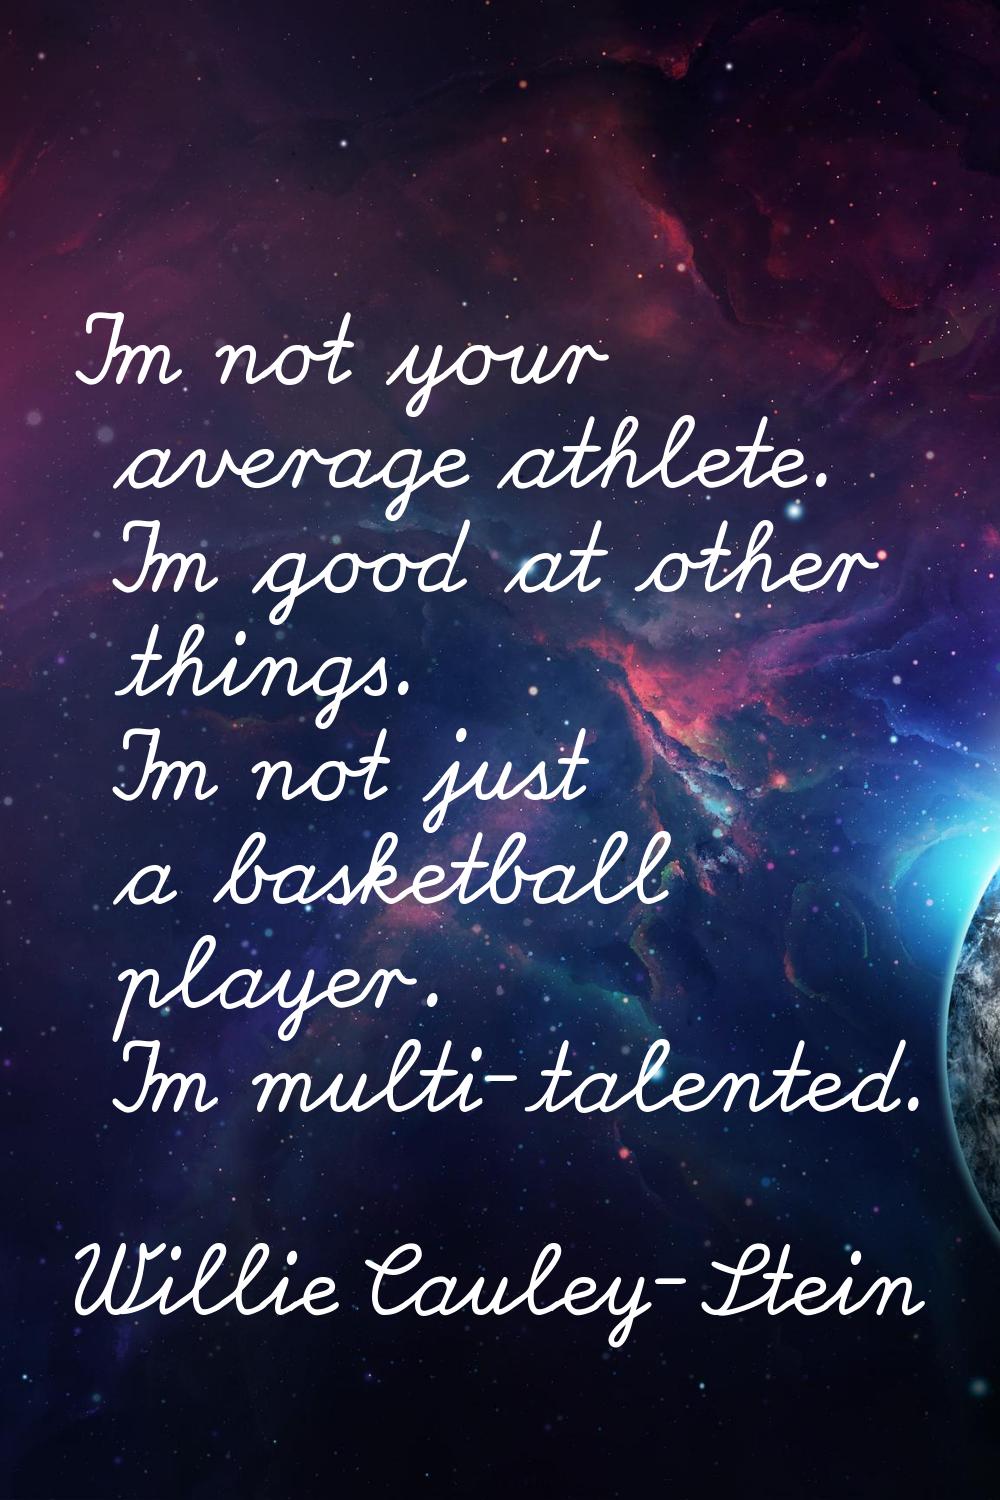 I'm not your average athlete. I'm good at other things. I'm not just a basketball player. I'm multi